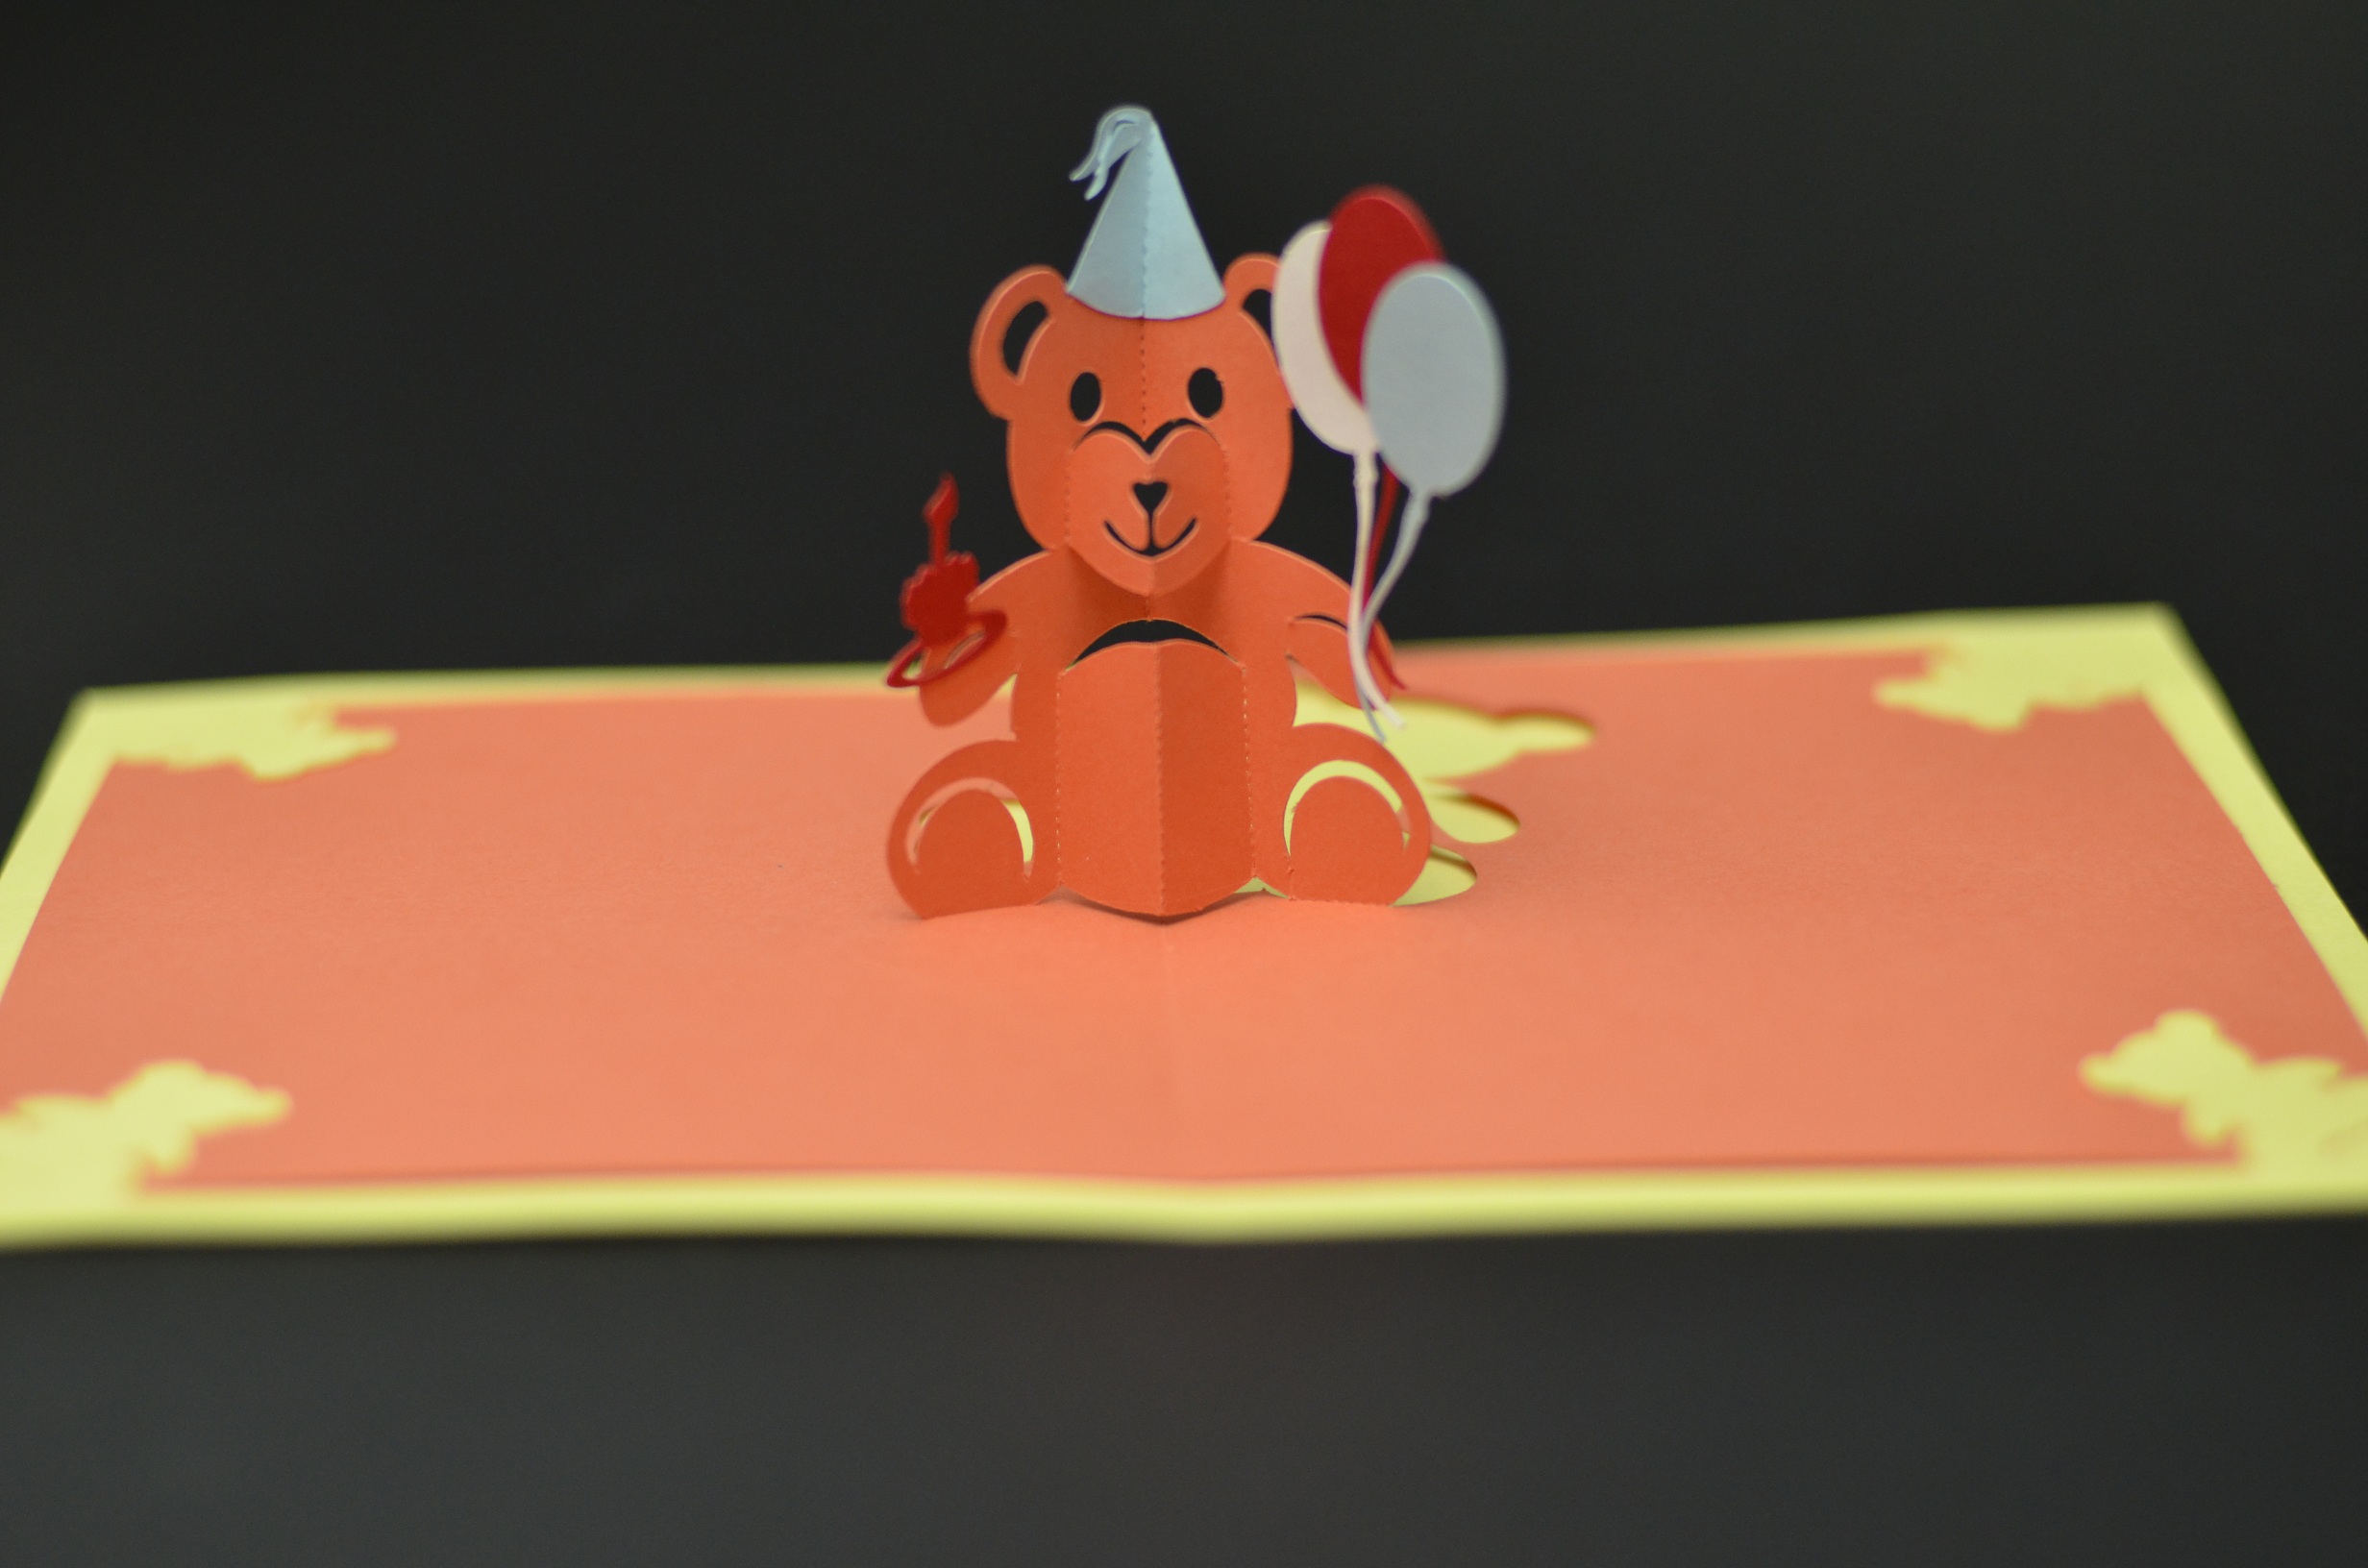 chocoviolet: how to make teddy bear pop up card Throughout Free Pop Up Card Templates Download